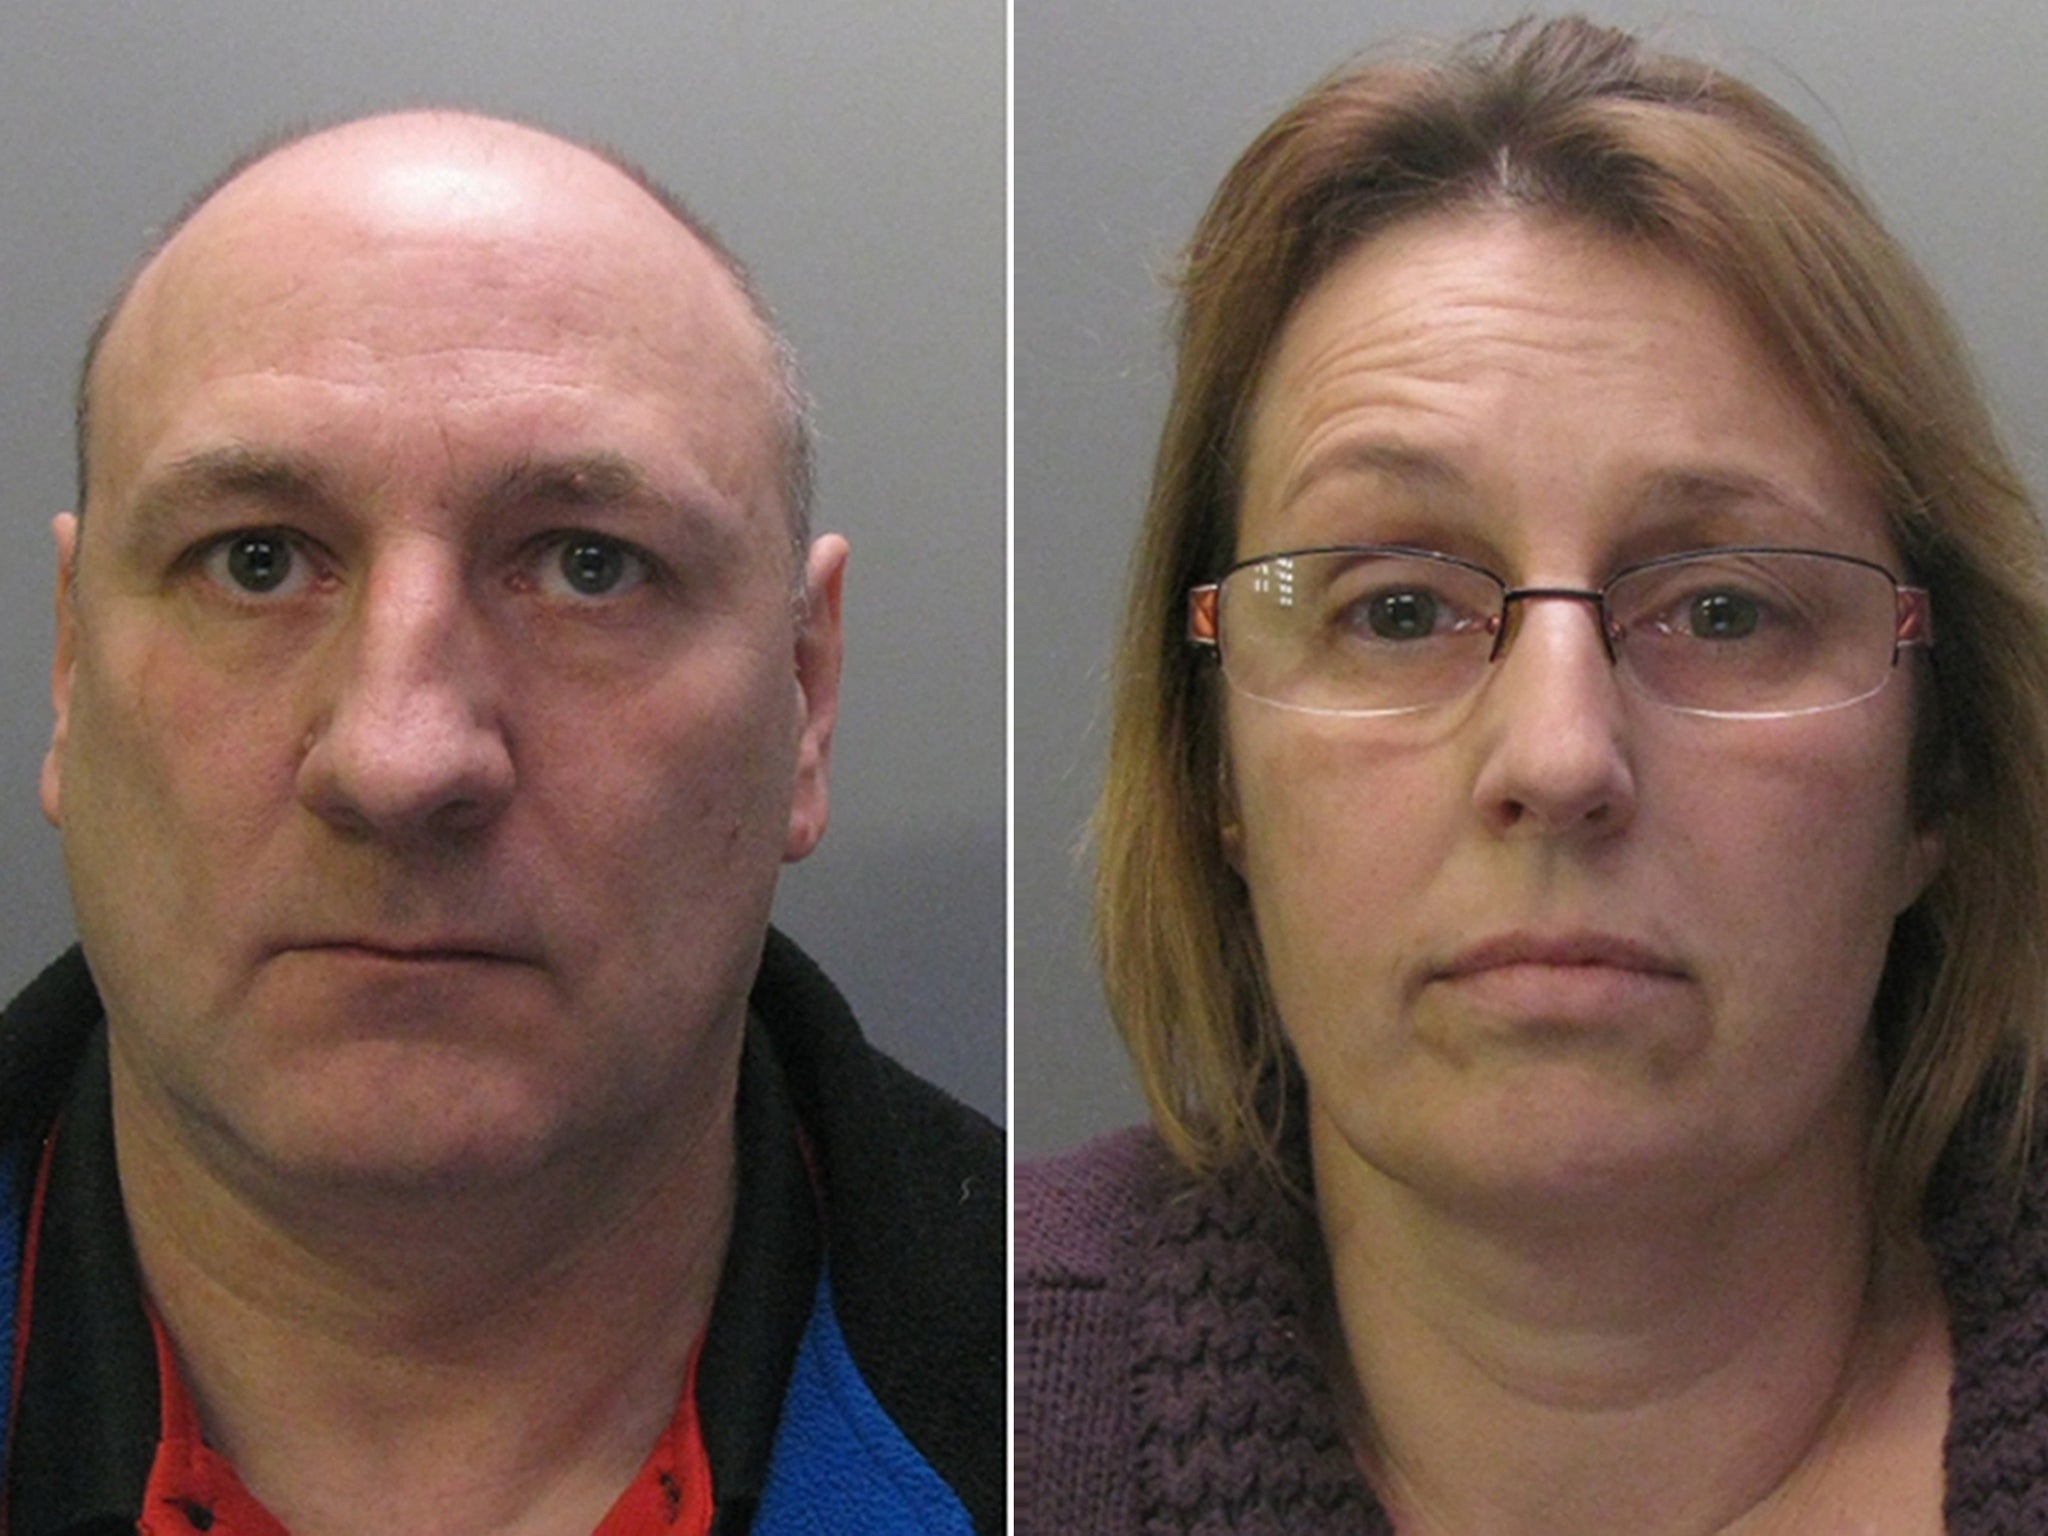 Michael and Lara Chase were convicted of sexually assaulting the child at Peterborough Crown Court